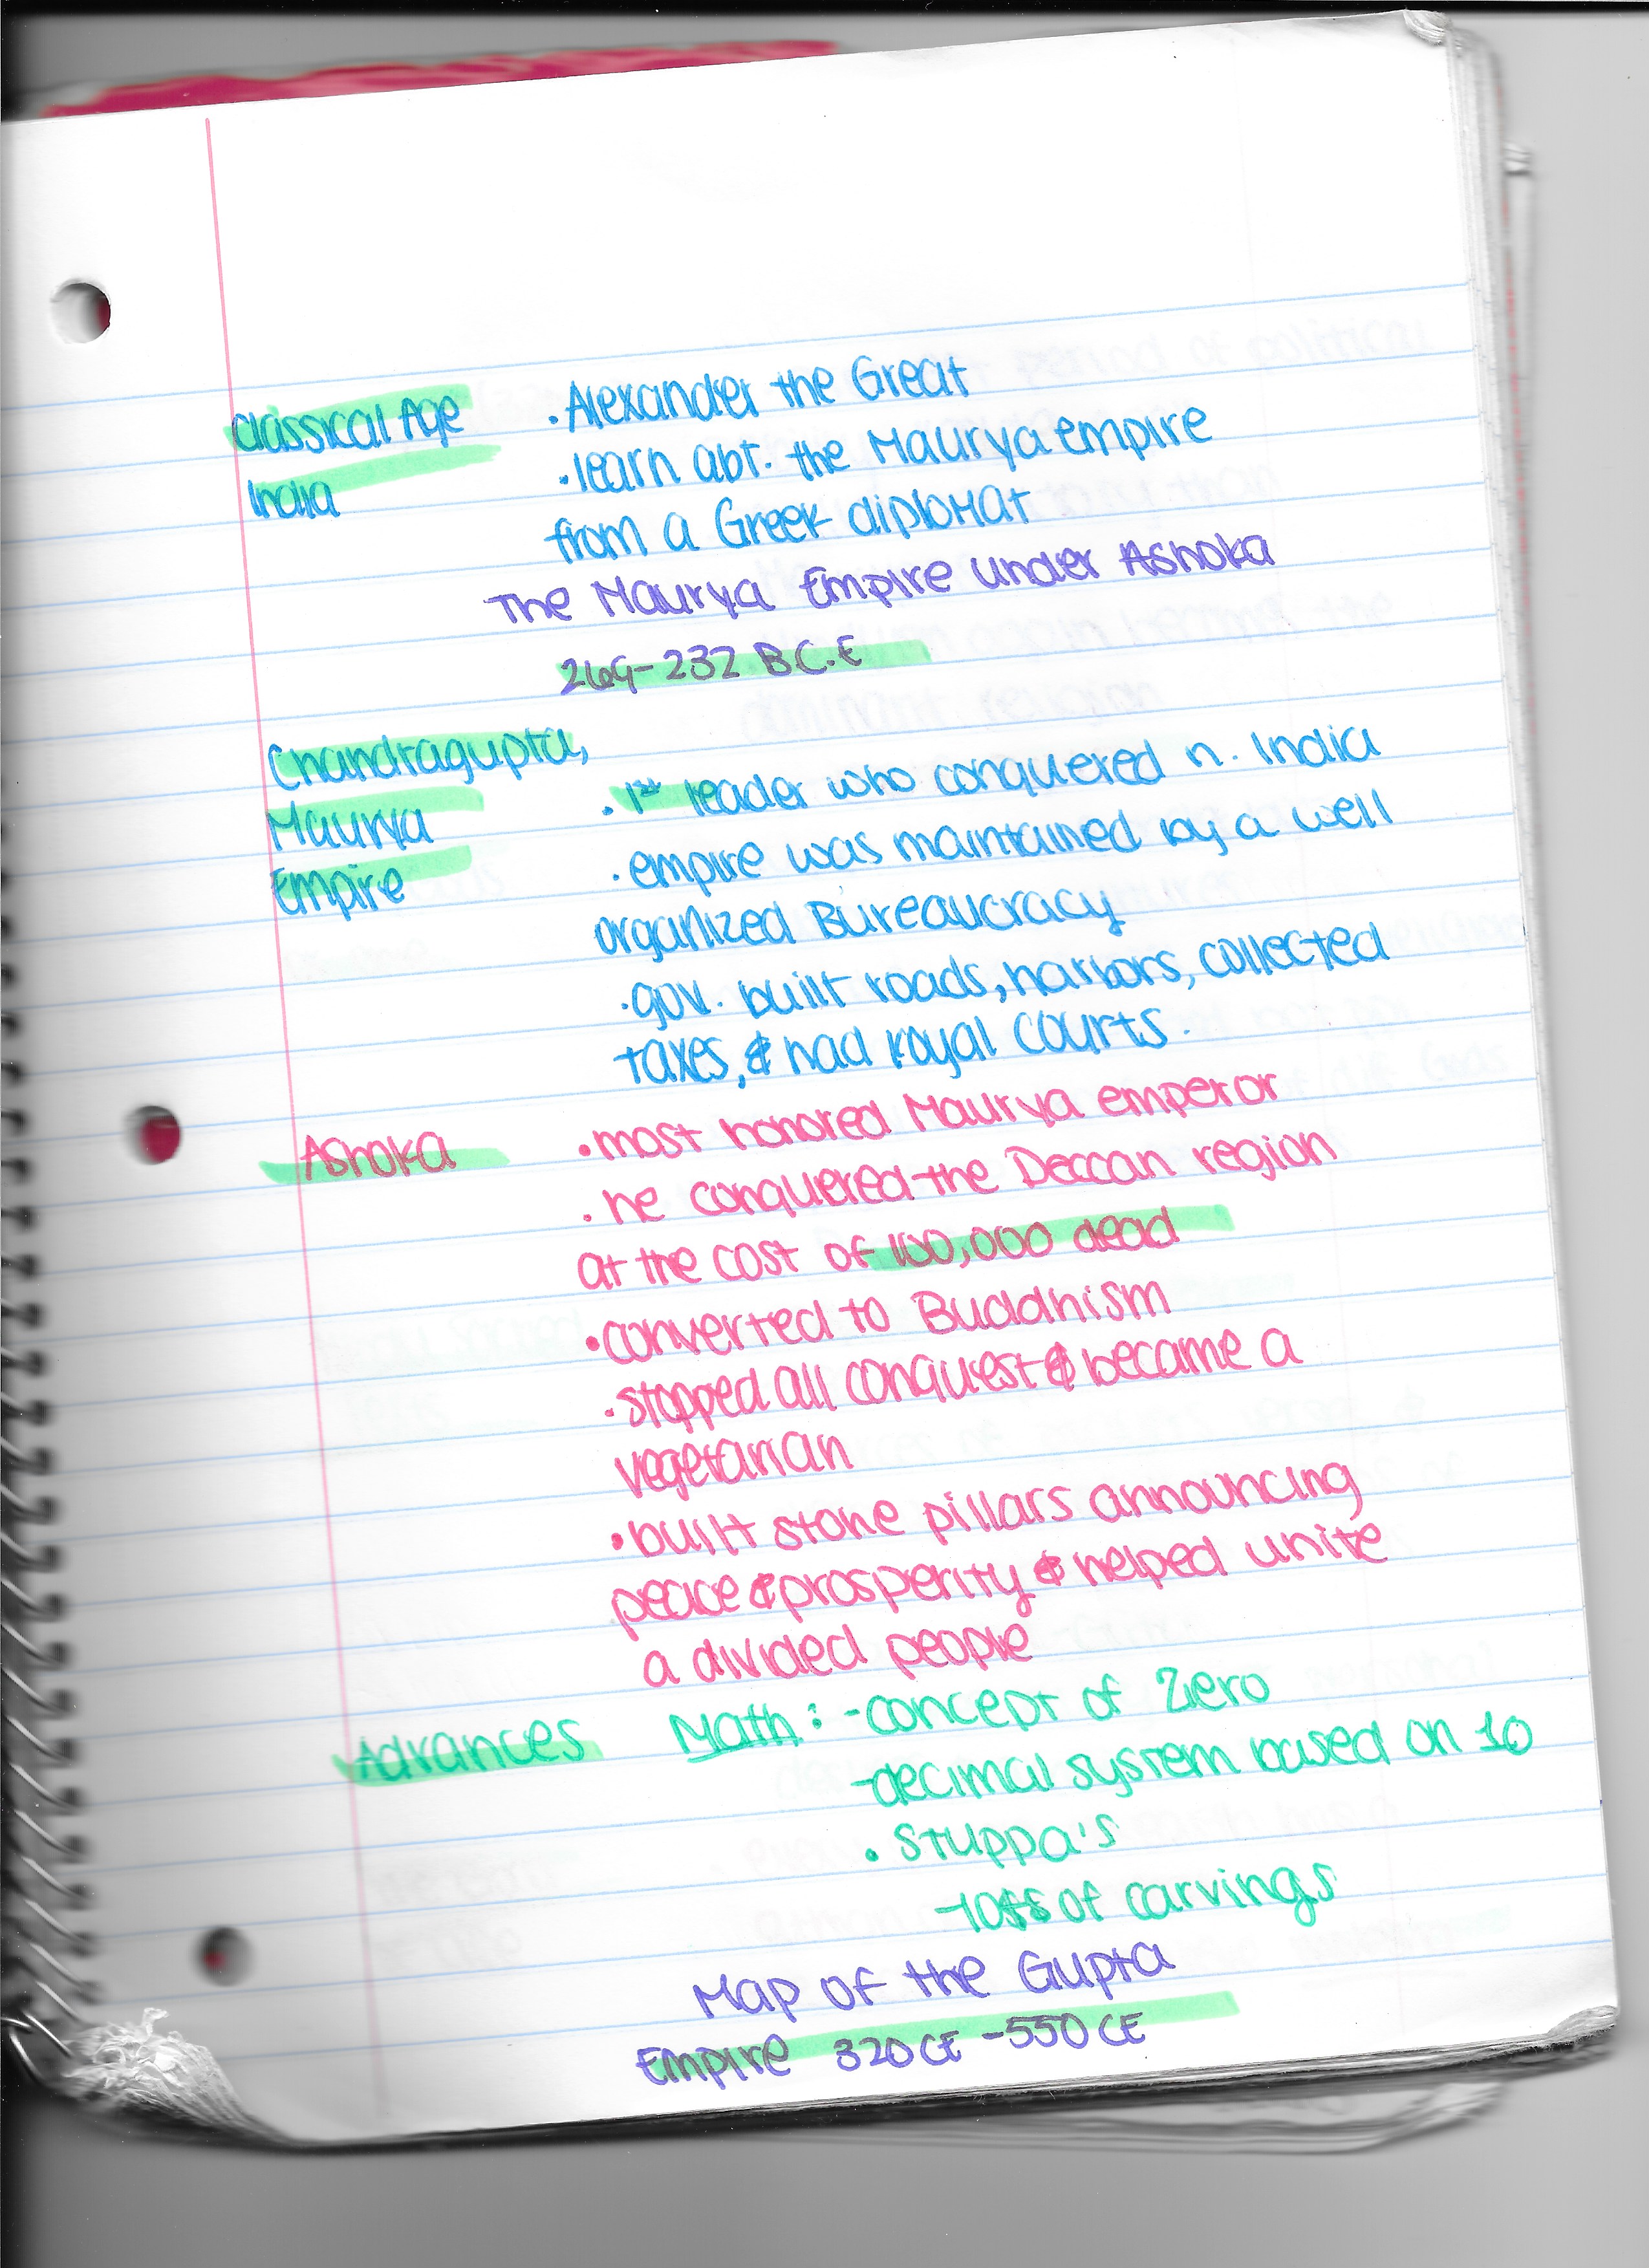 cornell-notes-history-the-cornell-note-2019-02-11